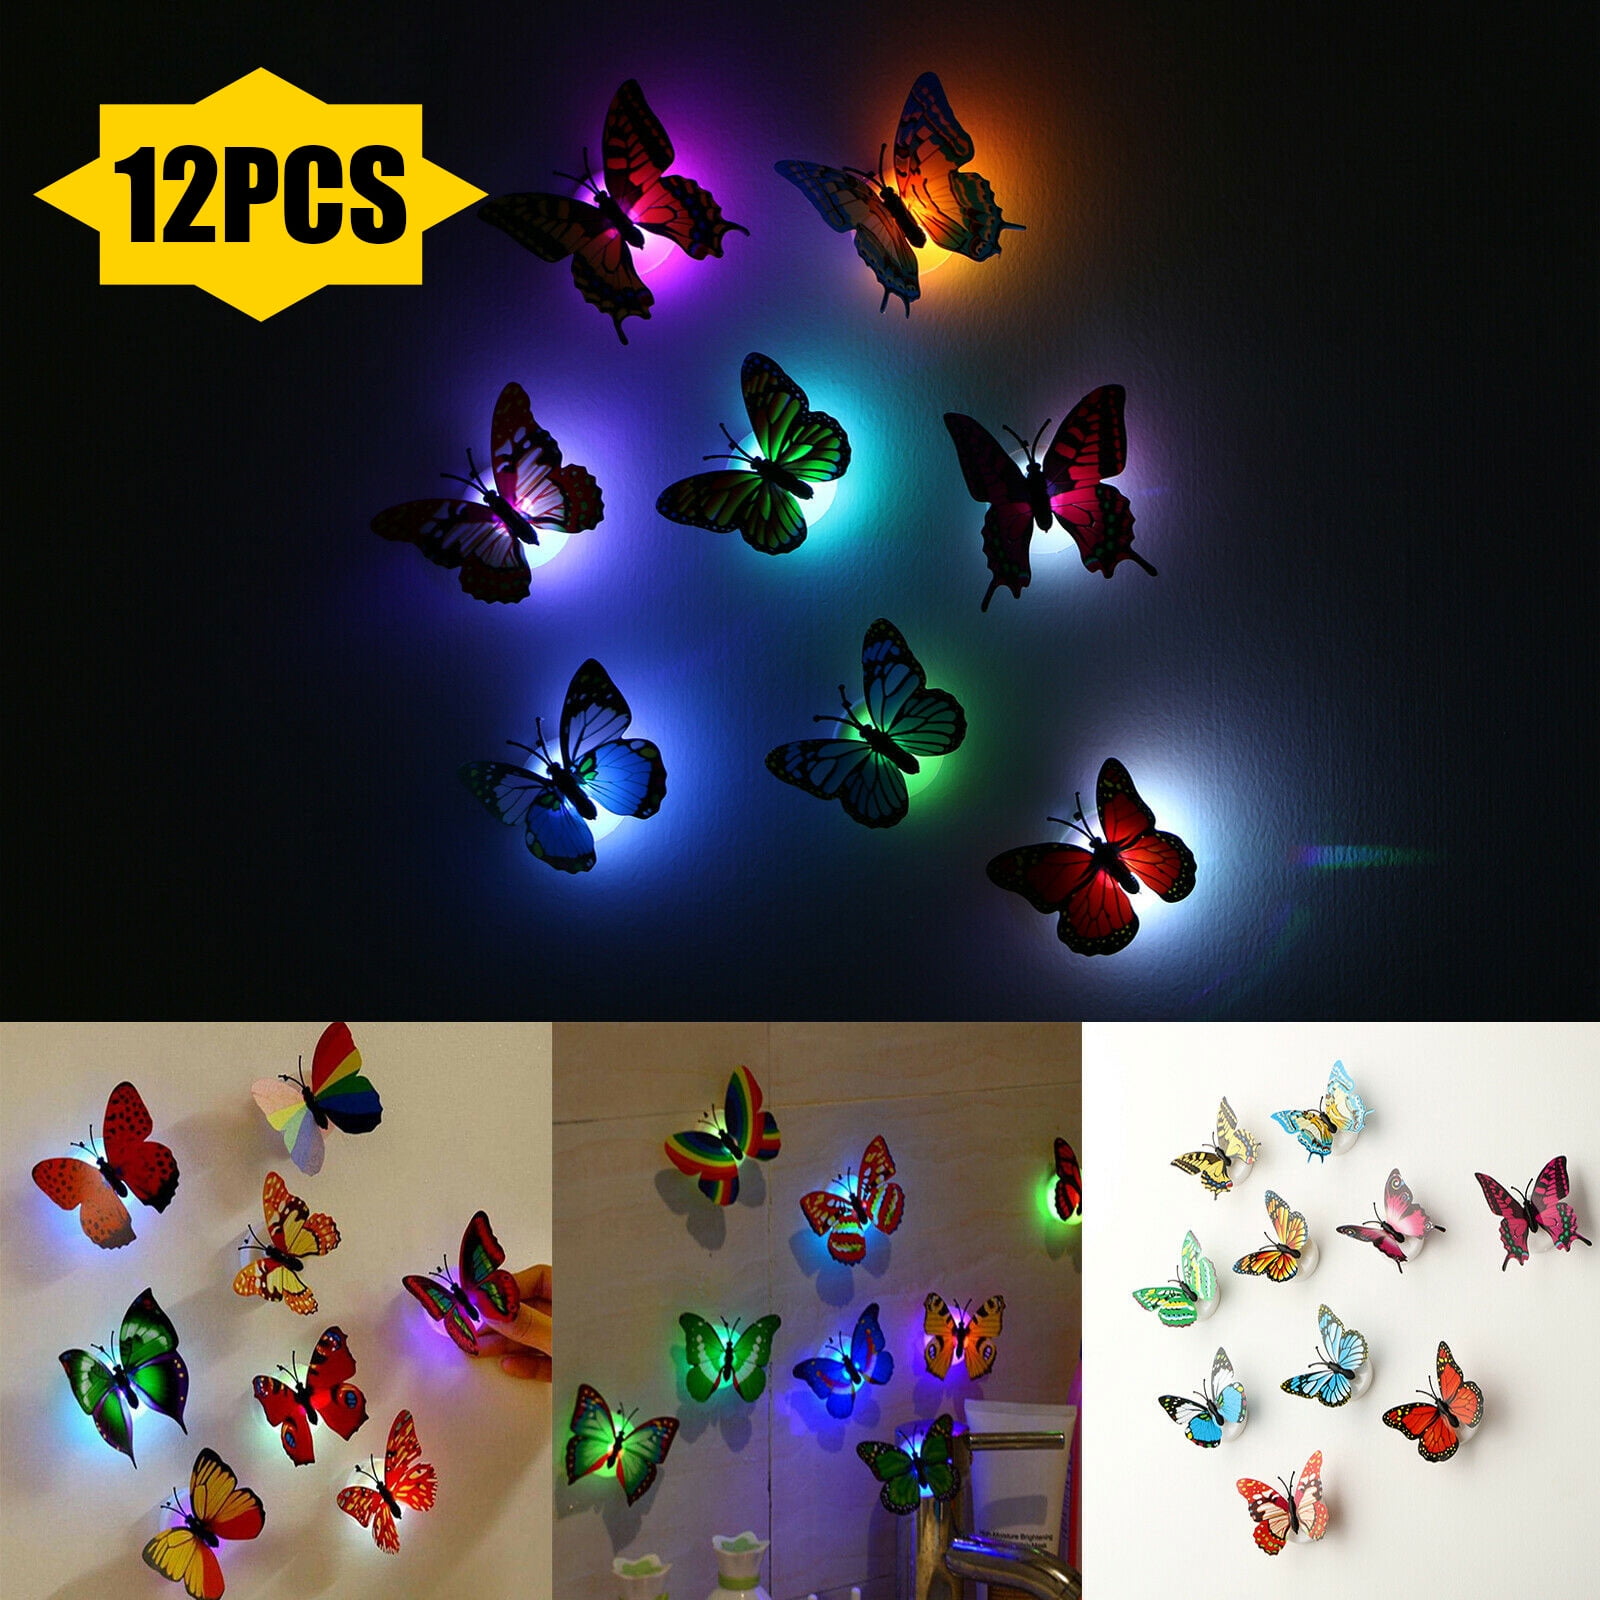 3D Butterfly Wall Stickers Decals Home Room Decor 2 Sets 24 Pieces 